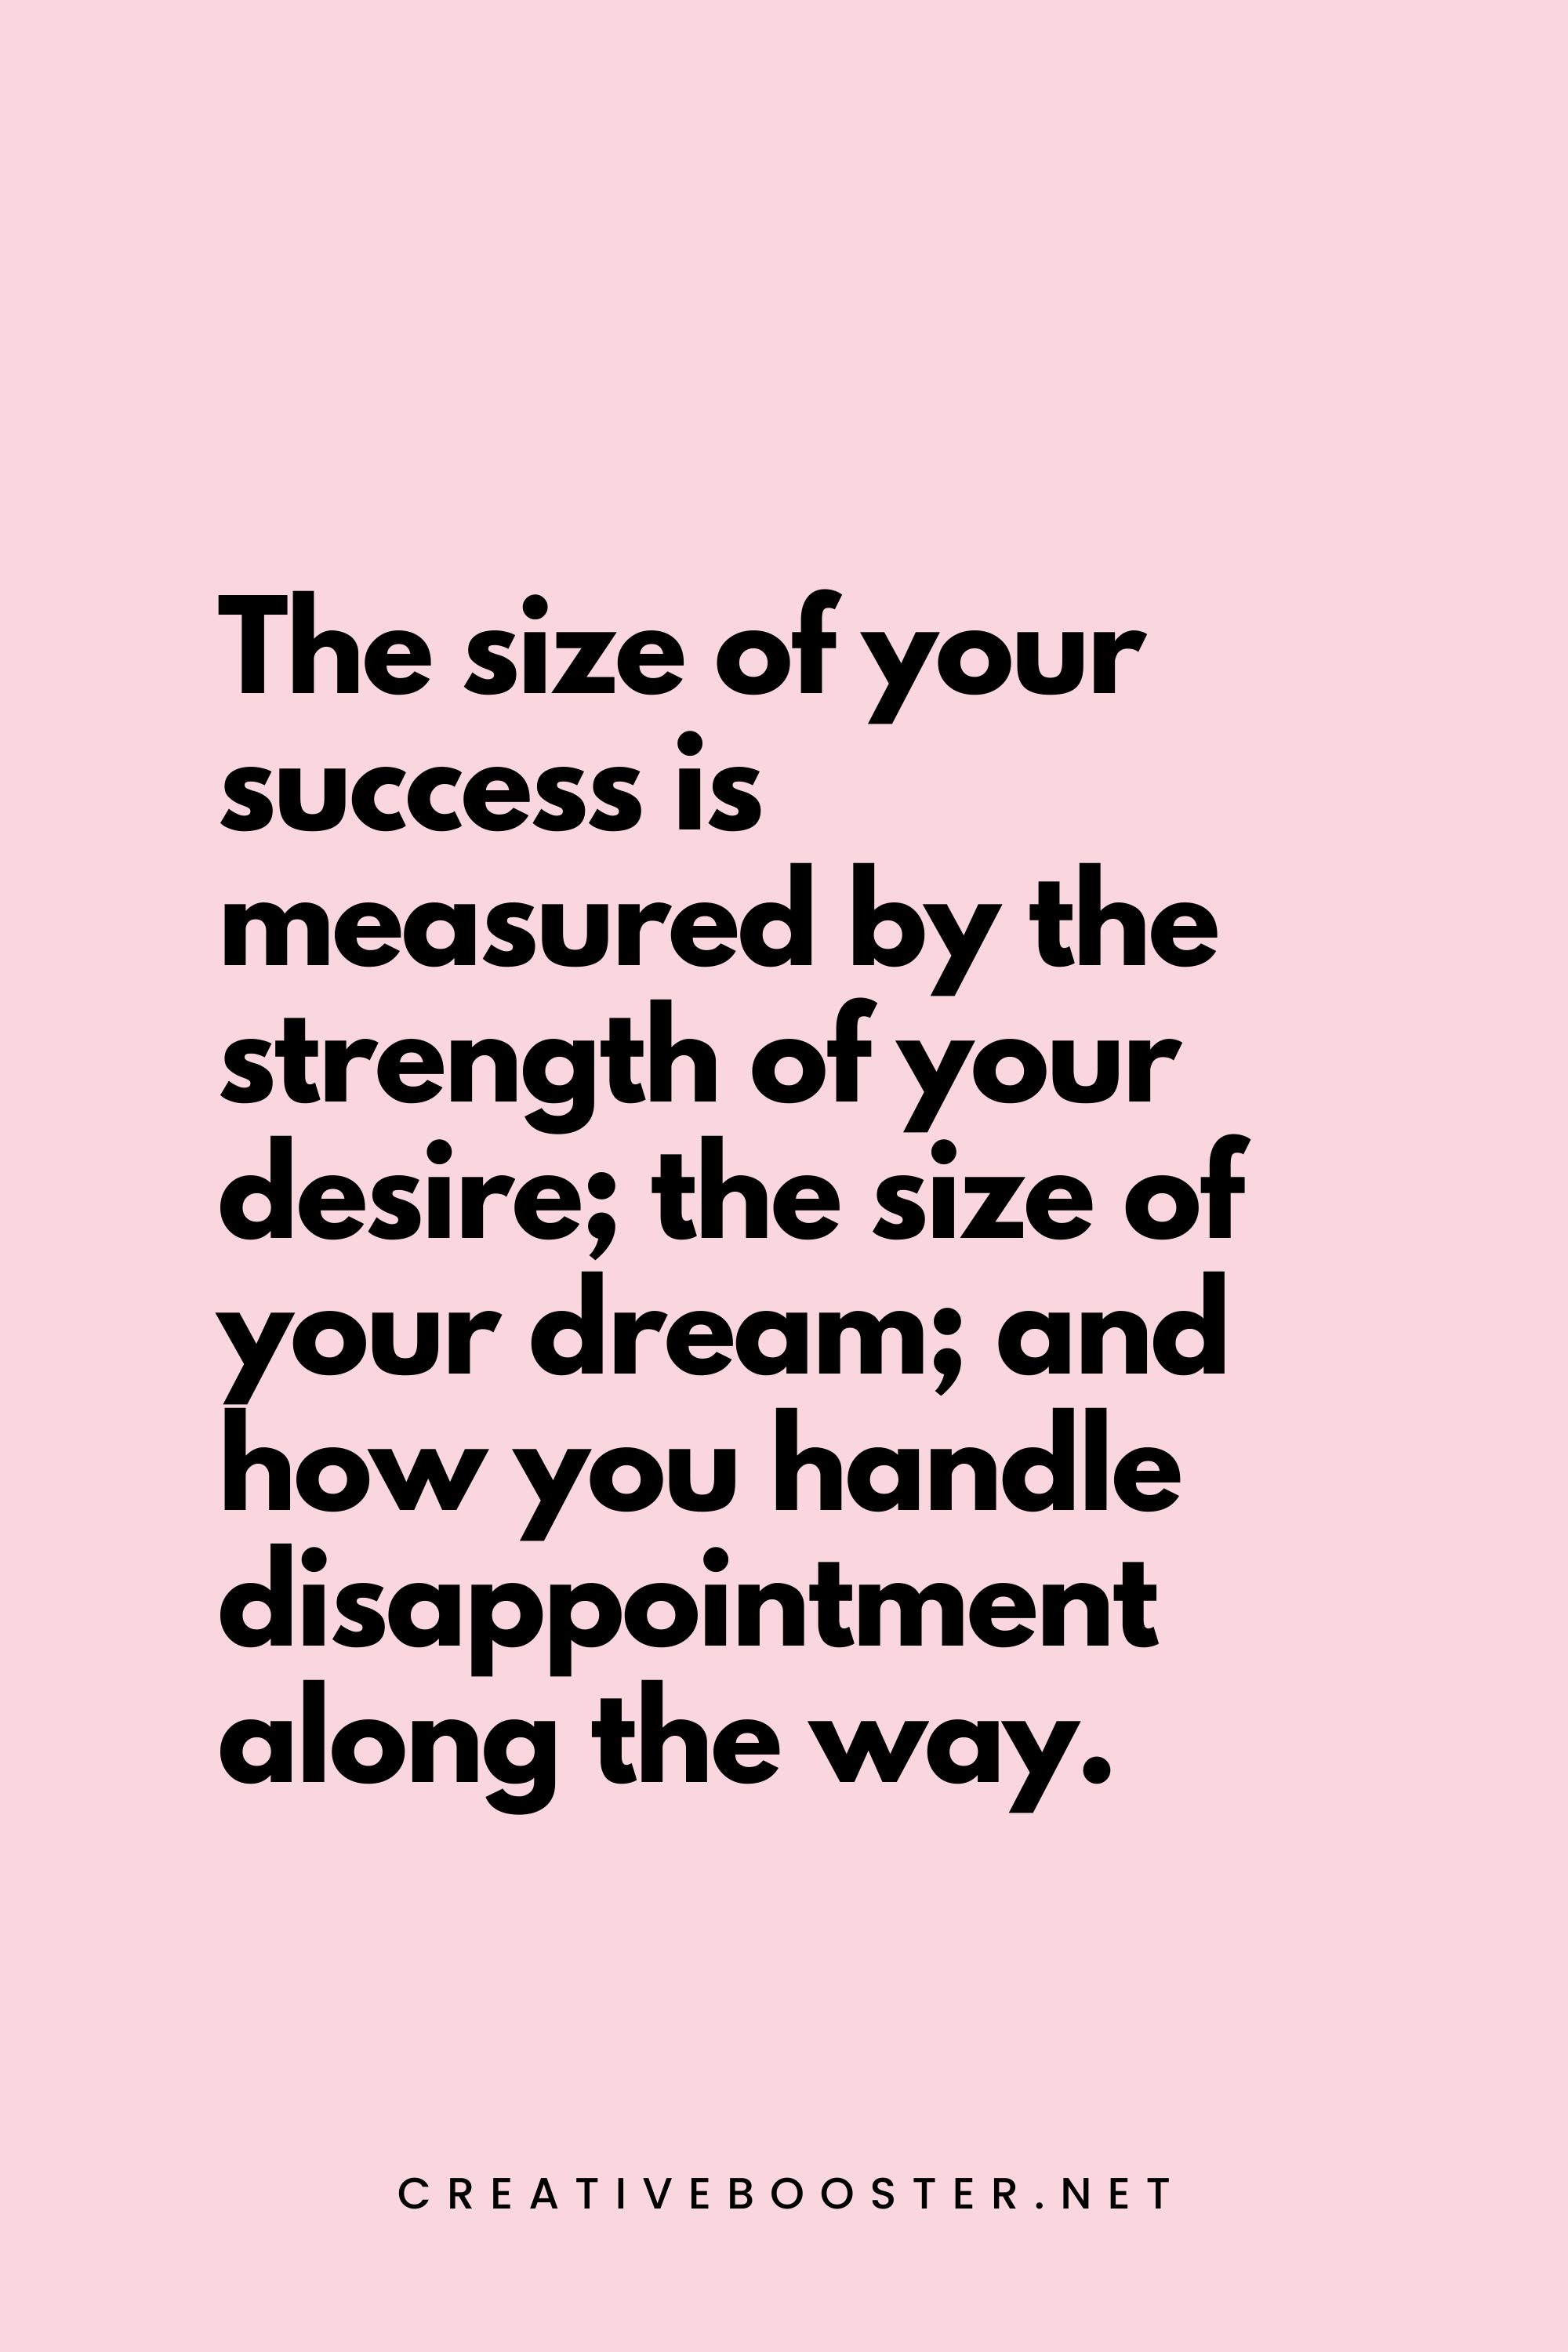 68. The size of your success is measured by the strength of your desire; the size of your dream; and how you handle disappointment along the way. - Robert Kiyosaki - 7. Financial Freedom Quotes by Robert Kiyosaki